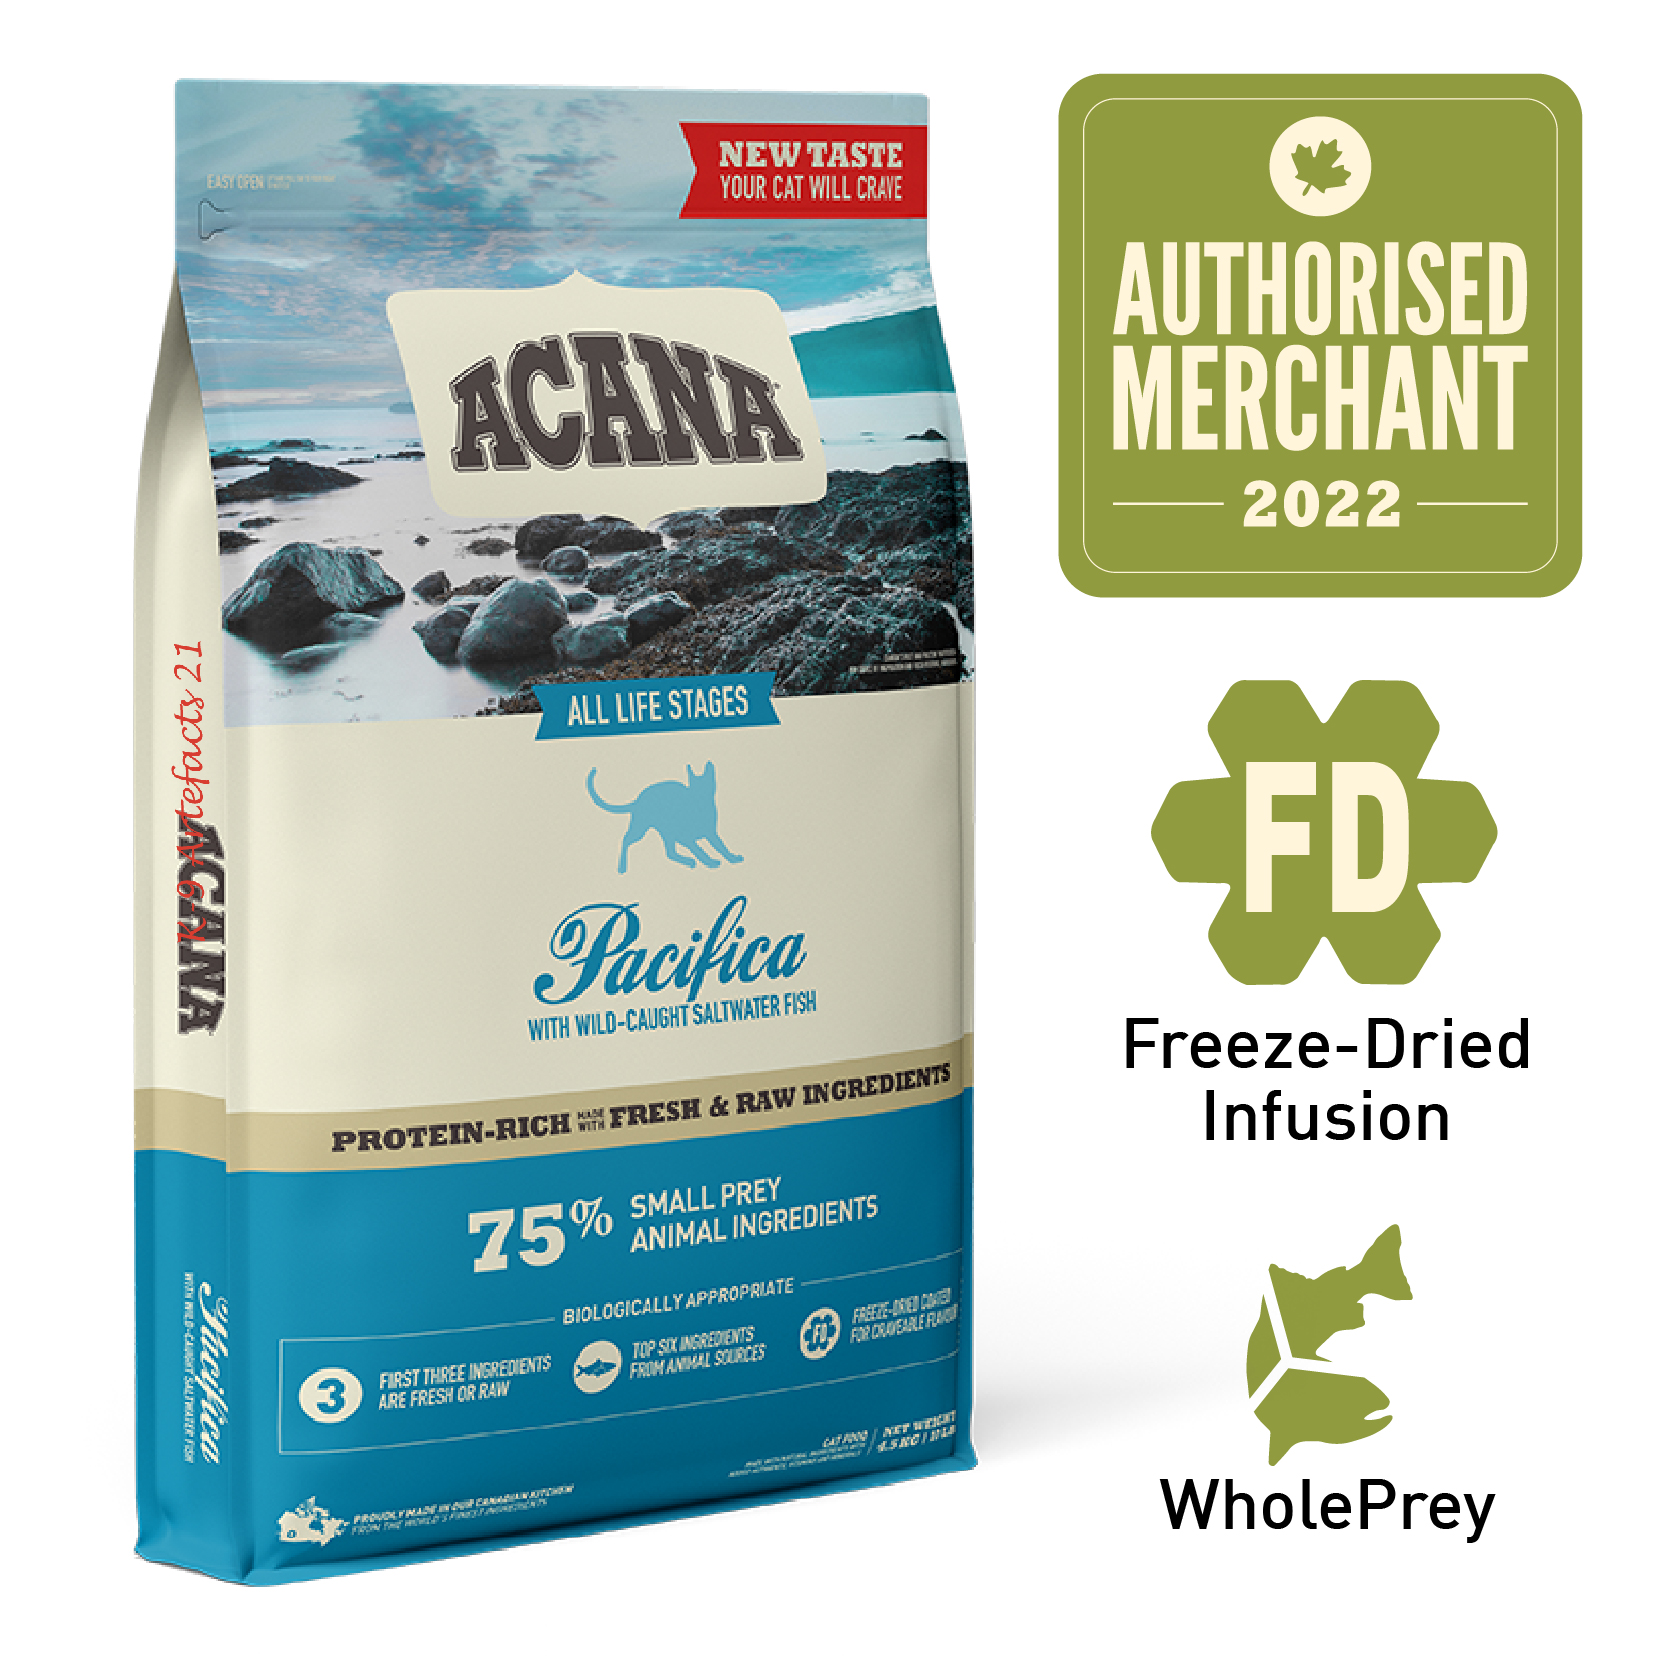 ACANA Regionals Freeze-Dried Infused Pacifica Cat Dry Food